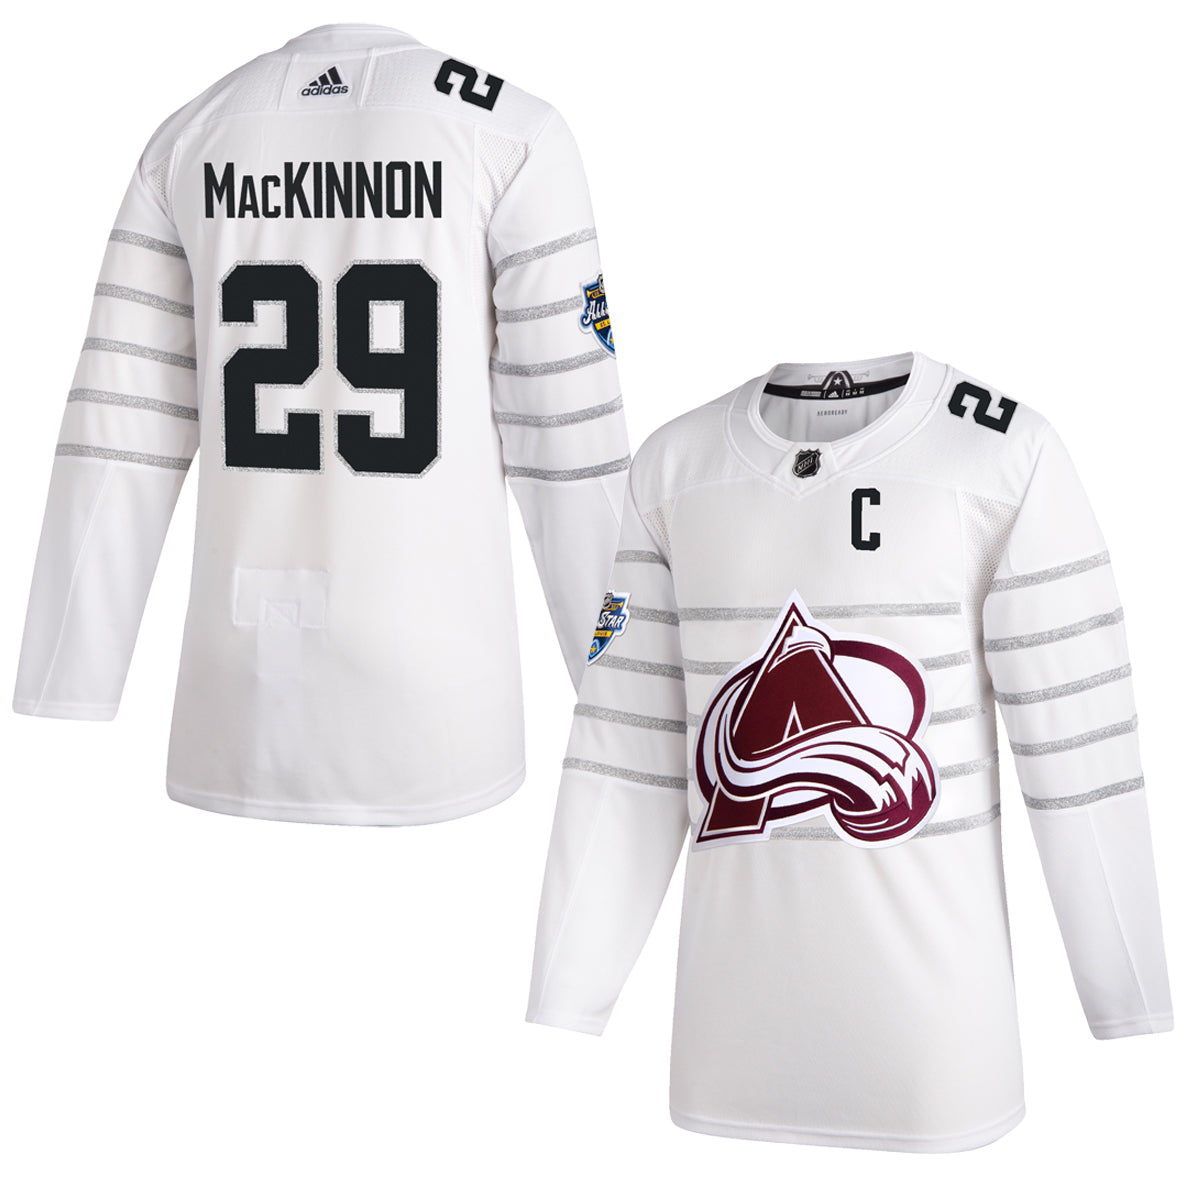 nathan mackinnon jersey for sale